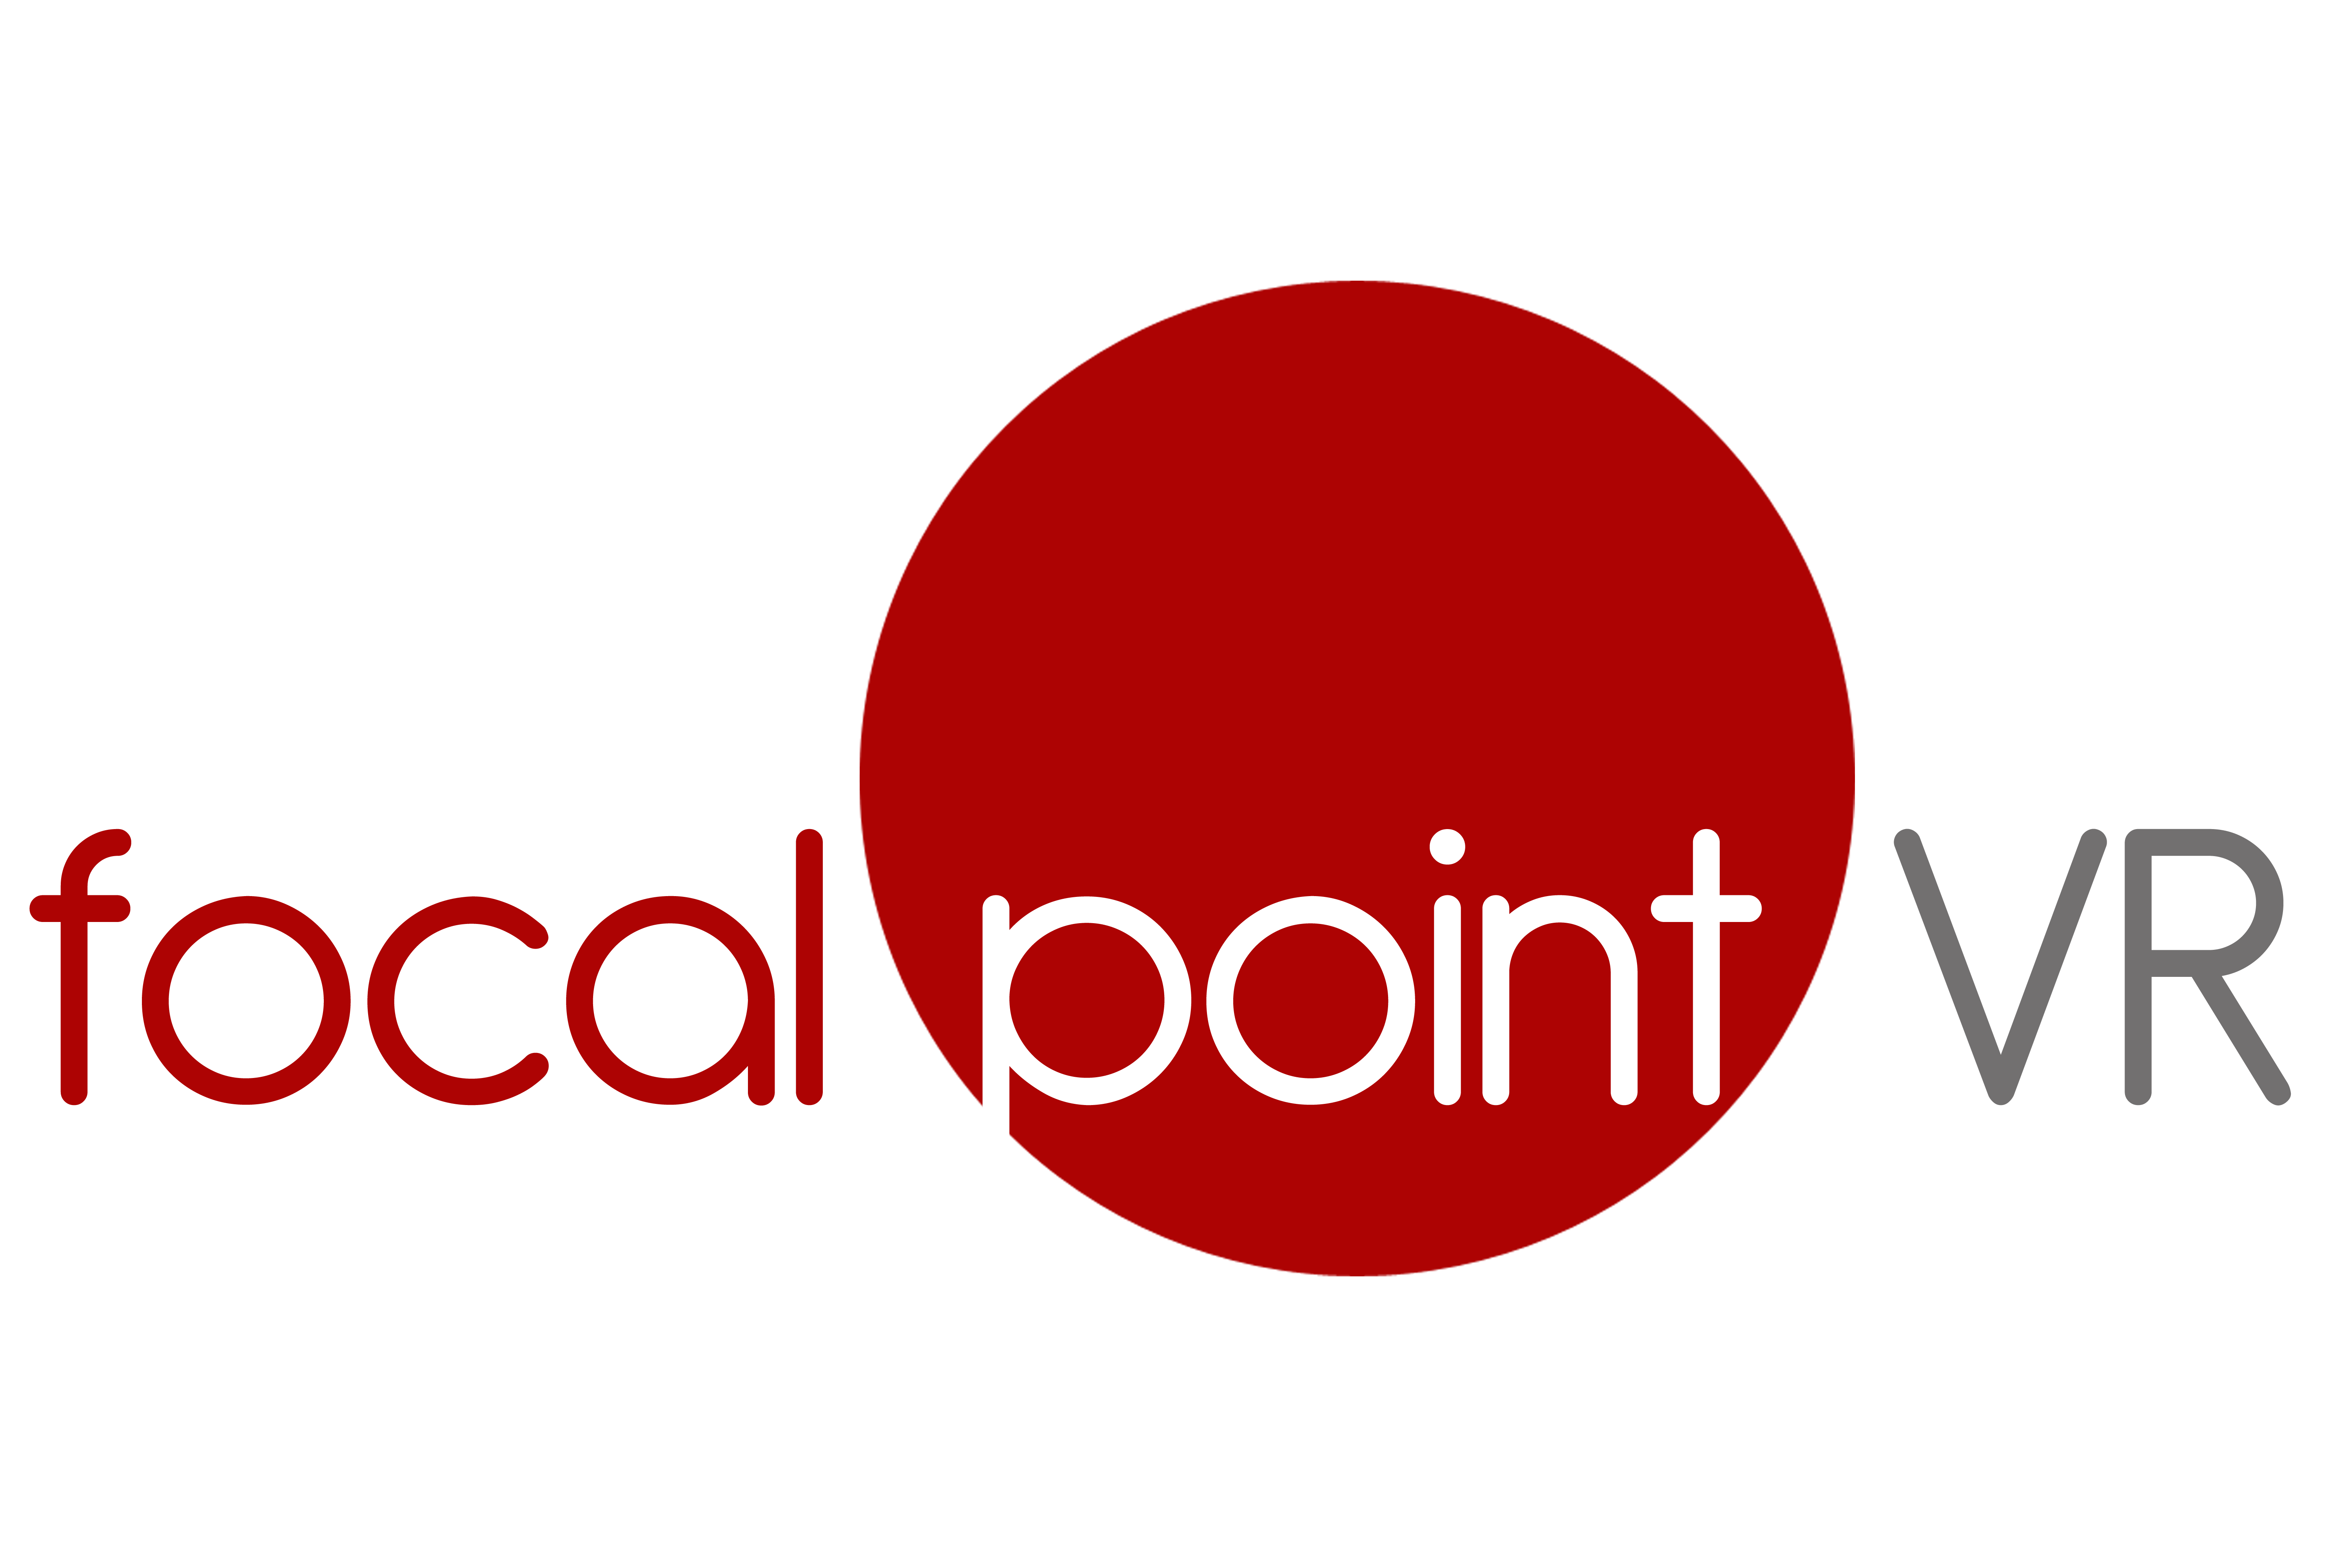 Focal Point VR